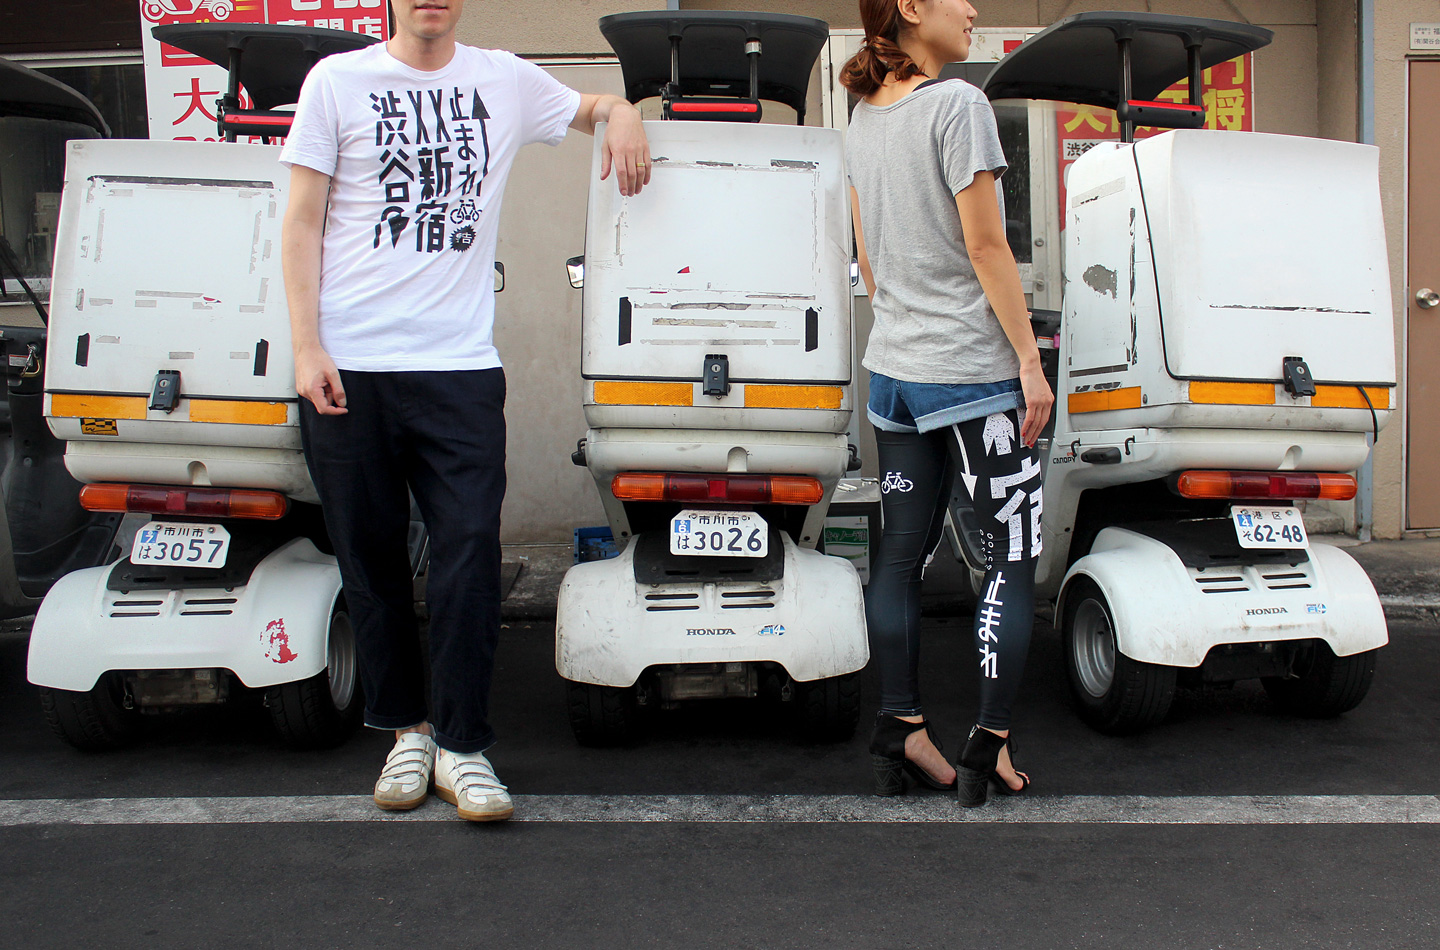 Tokyo Signs™ - Products inspired by the streets of Tokyo - From Shinjuku to Shibuya Leggings & Tokyo Roadmarks T-shirt